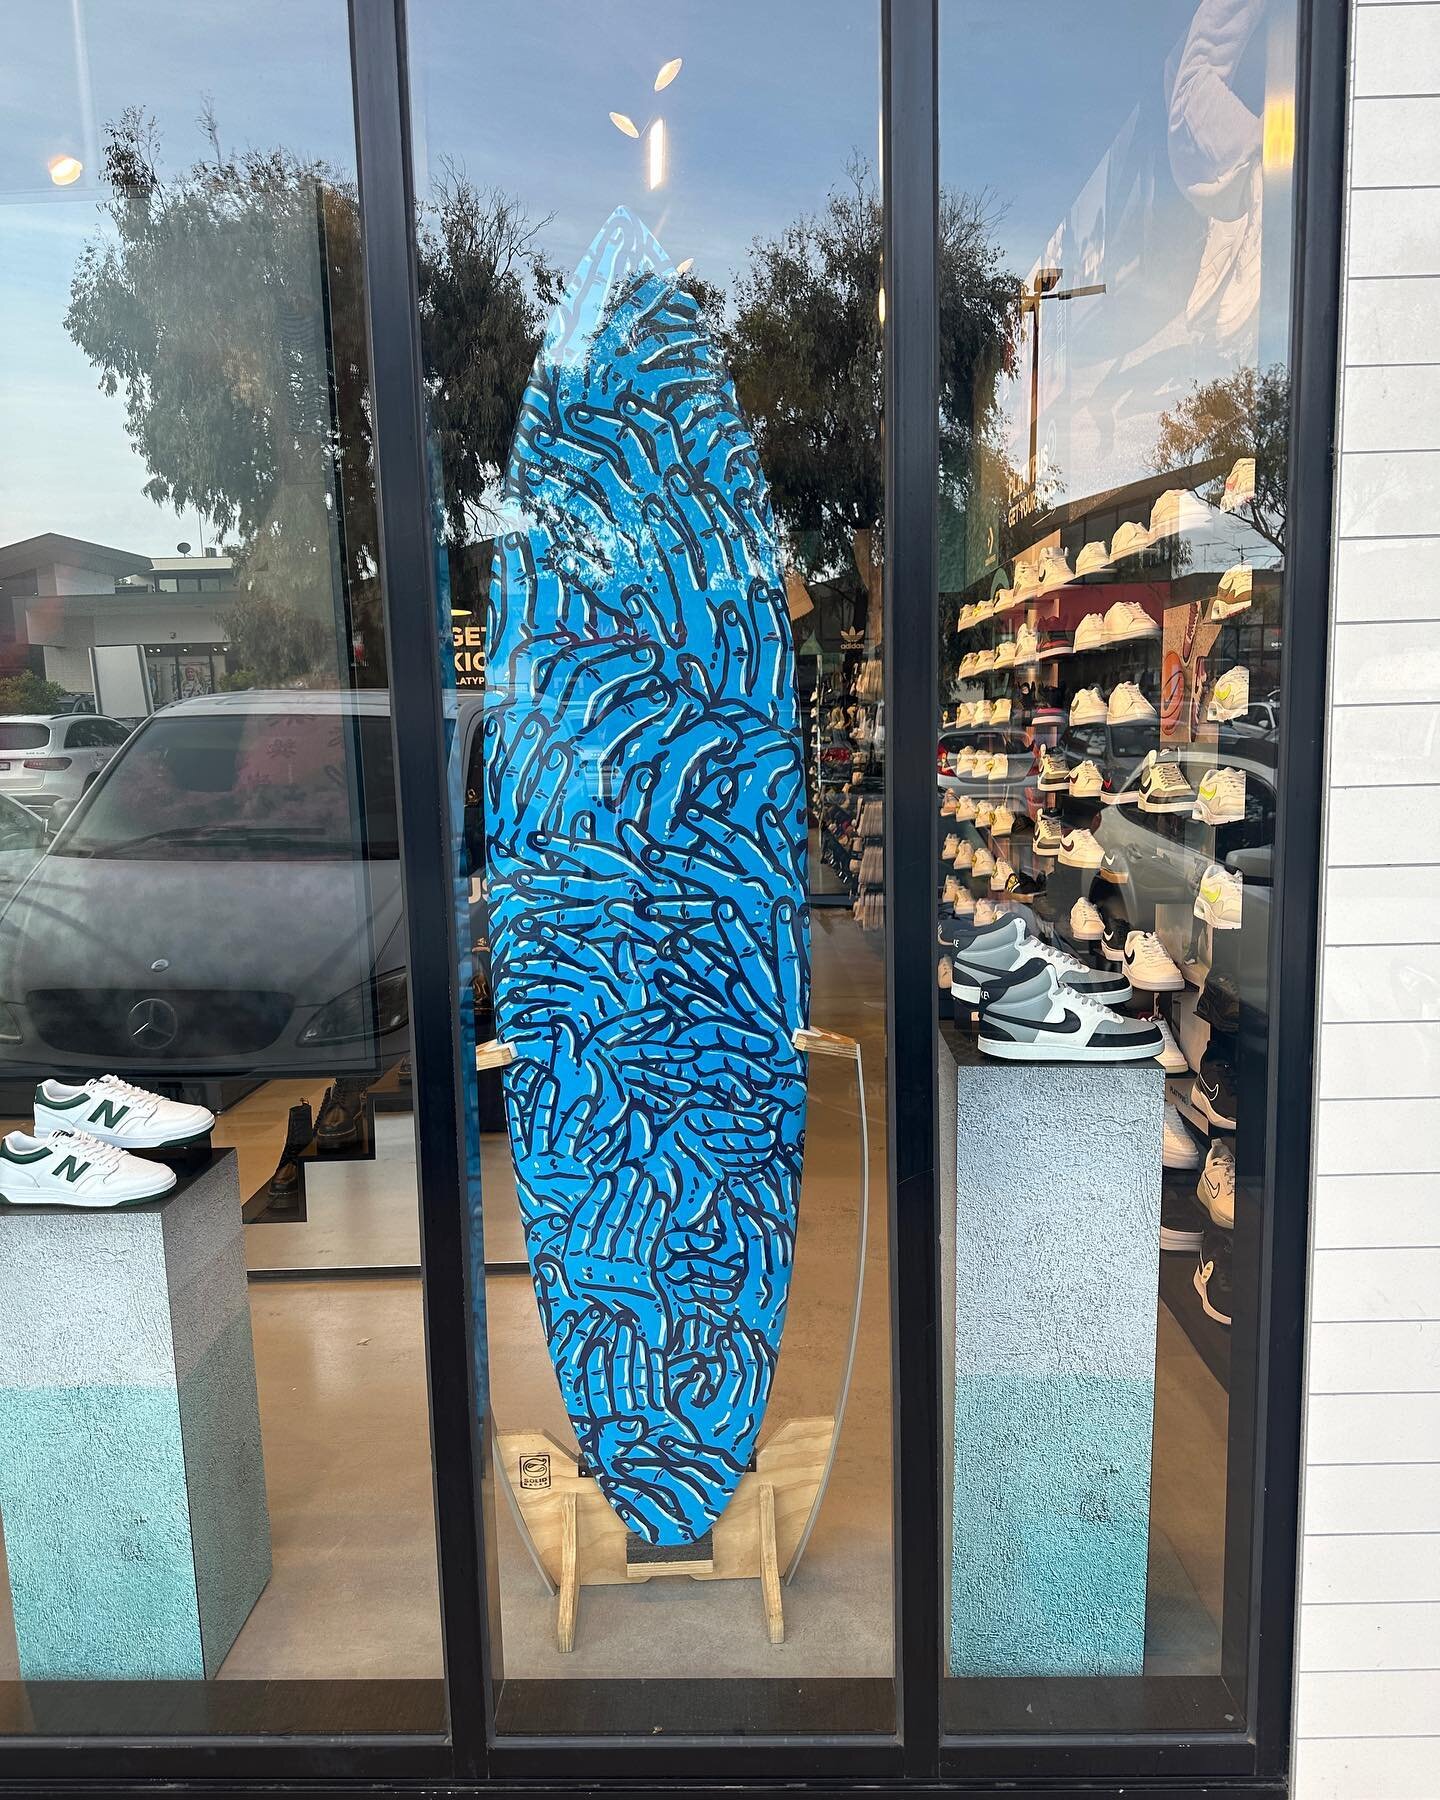 &lsquo;Waves&rsquo;
Painted surfboard for @platypus_sneakers 
On display at Platypus in Torquay. 
Thanks for the cool opportunity to paint a surfboard! 
Nori and I love heading down to Torquay - we go nearly once a week! 🌊 
.
.
.
. 
#gonketa #surfbo